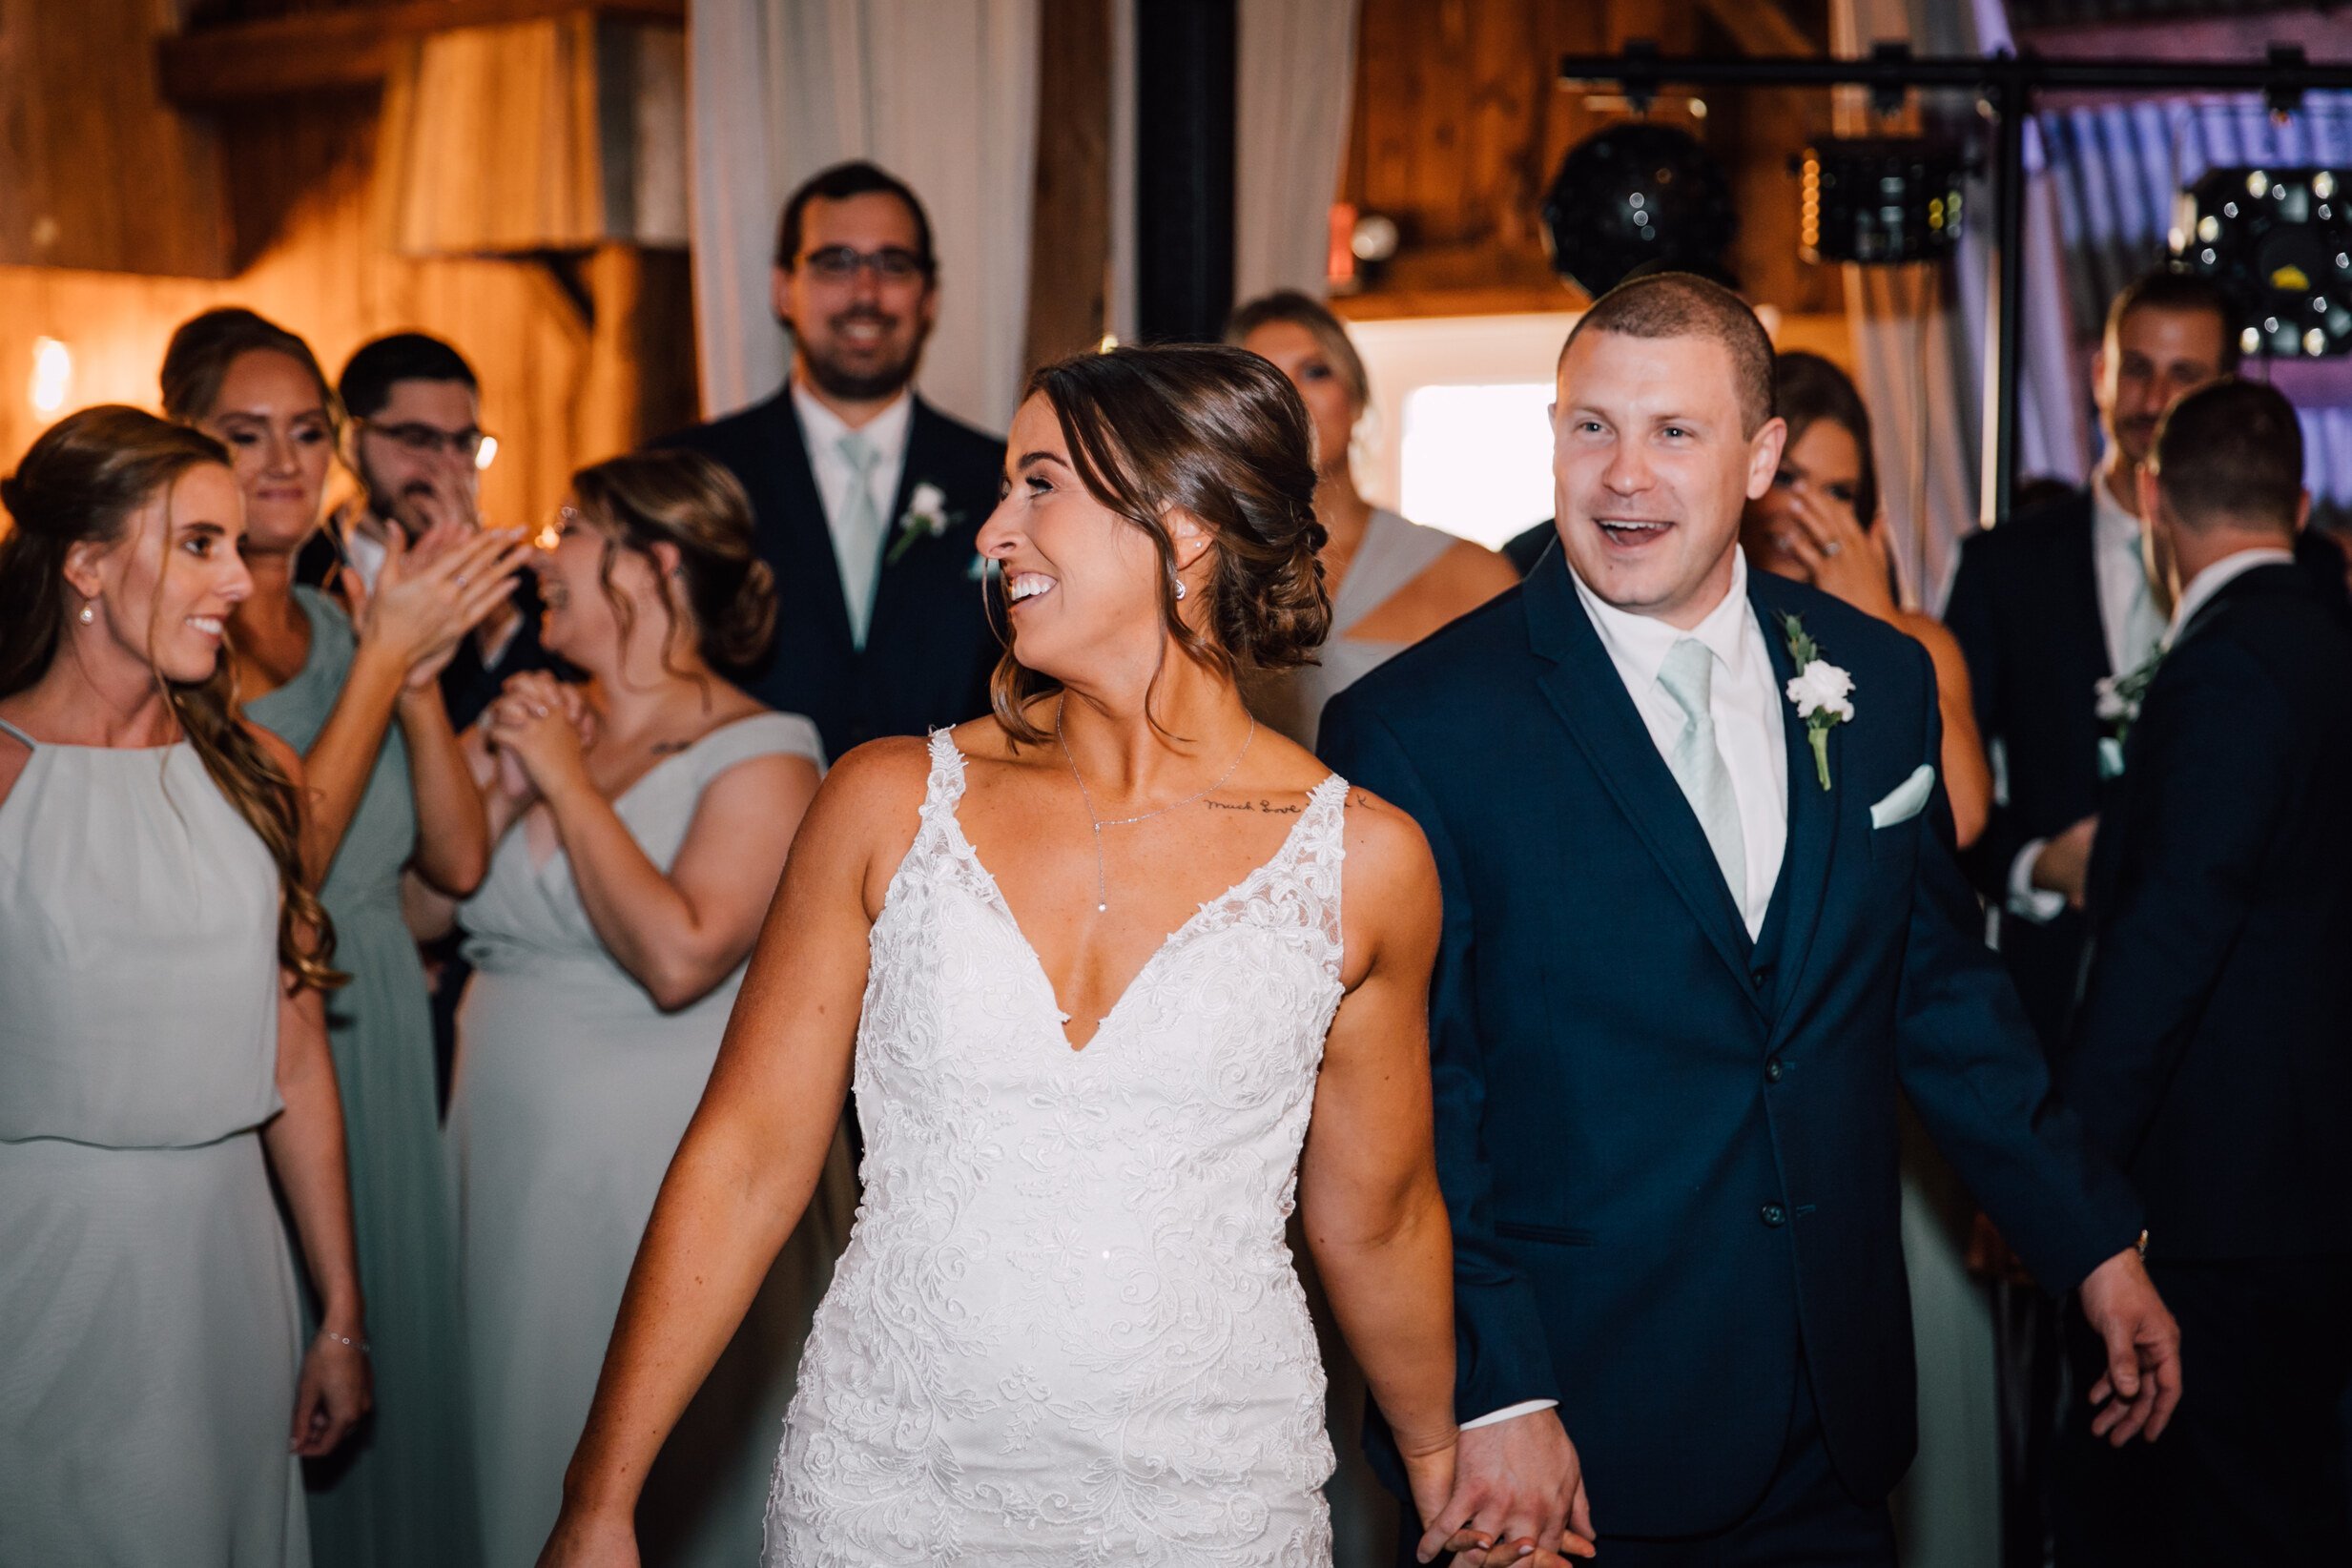  The bride and groom smile as they are entering their rustic barn wedding reception and surrounded by their wedding party 